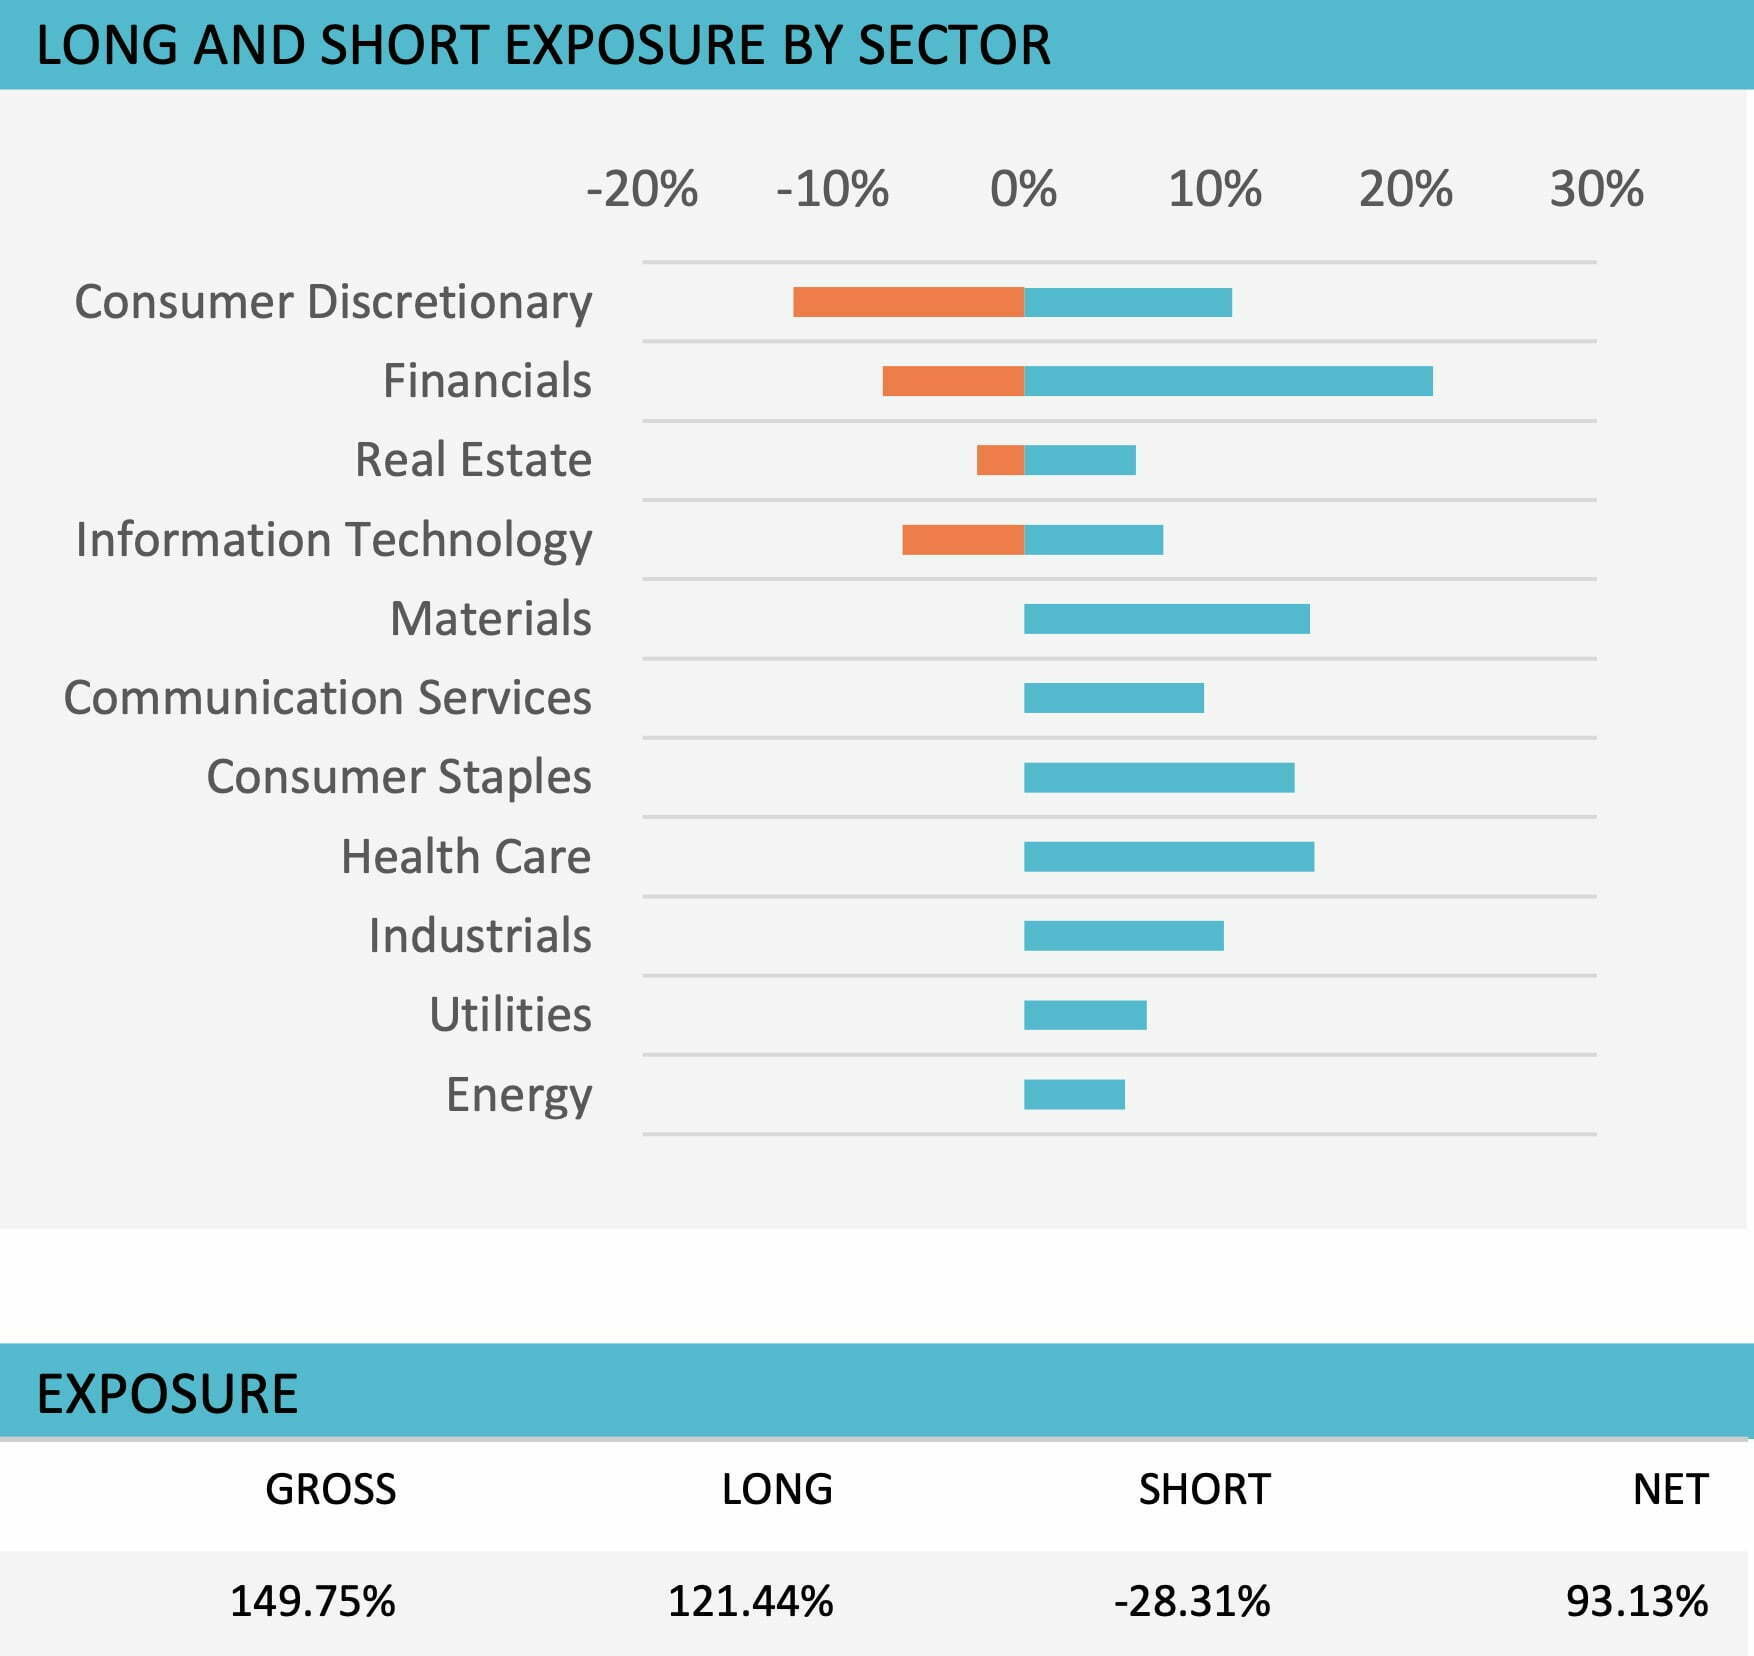 LBAY Long and Short Exposure By Sector including Exposure Gross, Long, Short and Net 